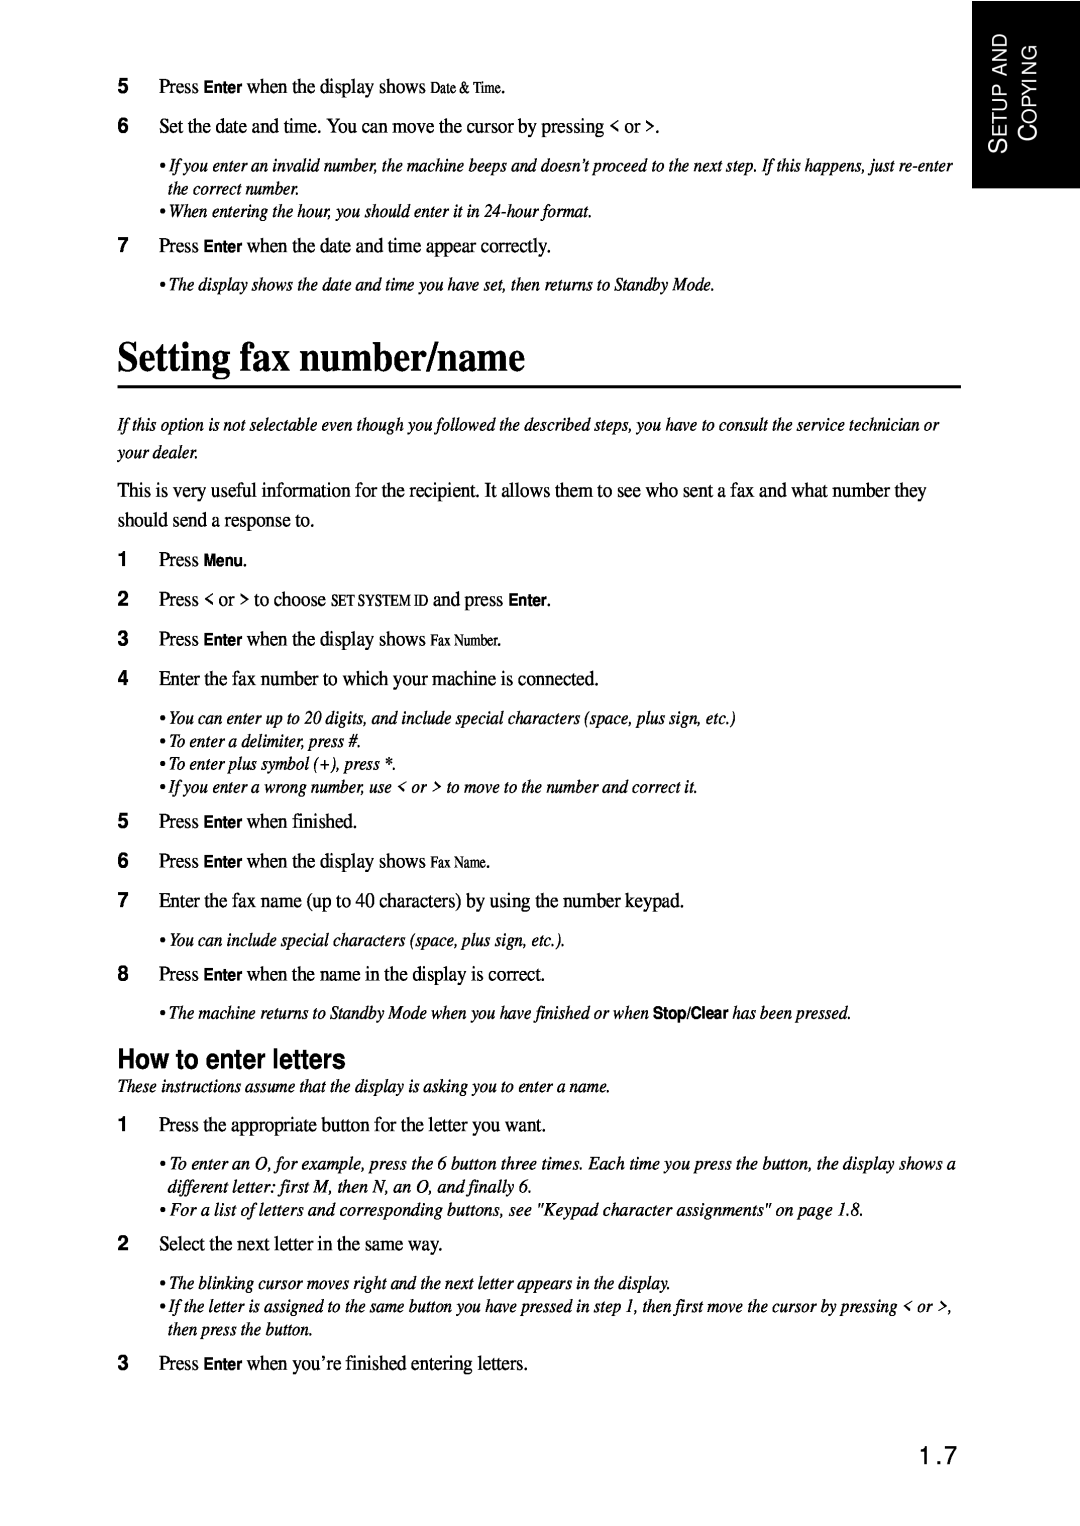 Samsung SF-340 Series manual Setting fax number/name, How to enter letters 